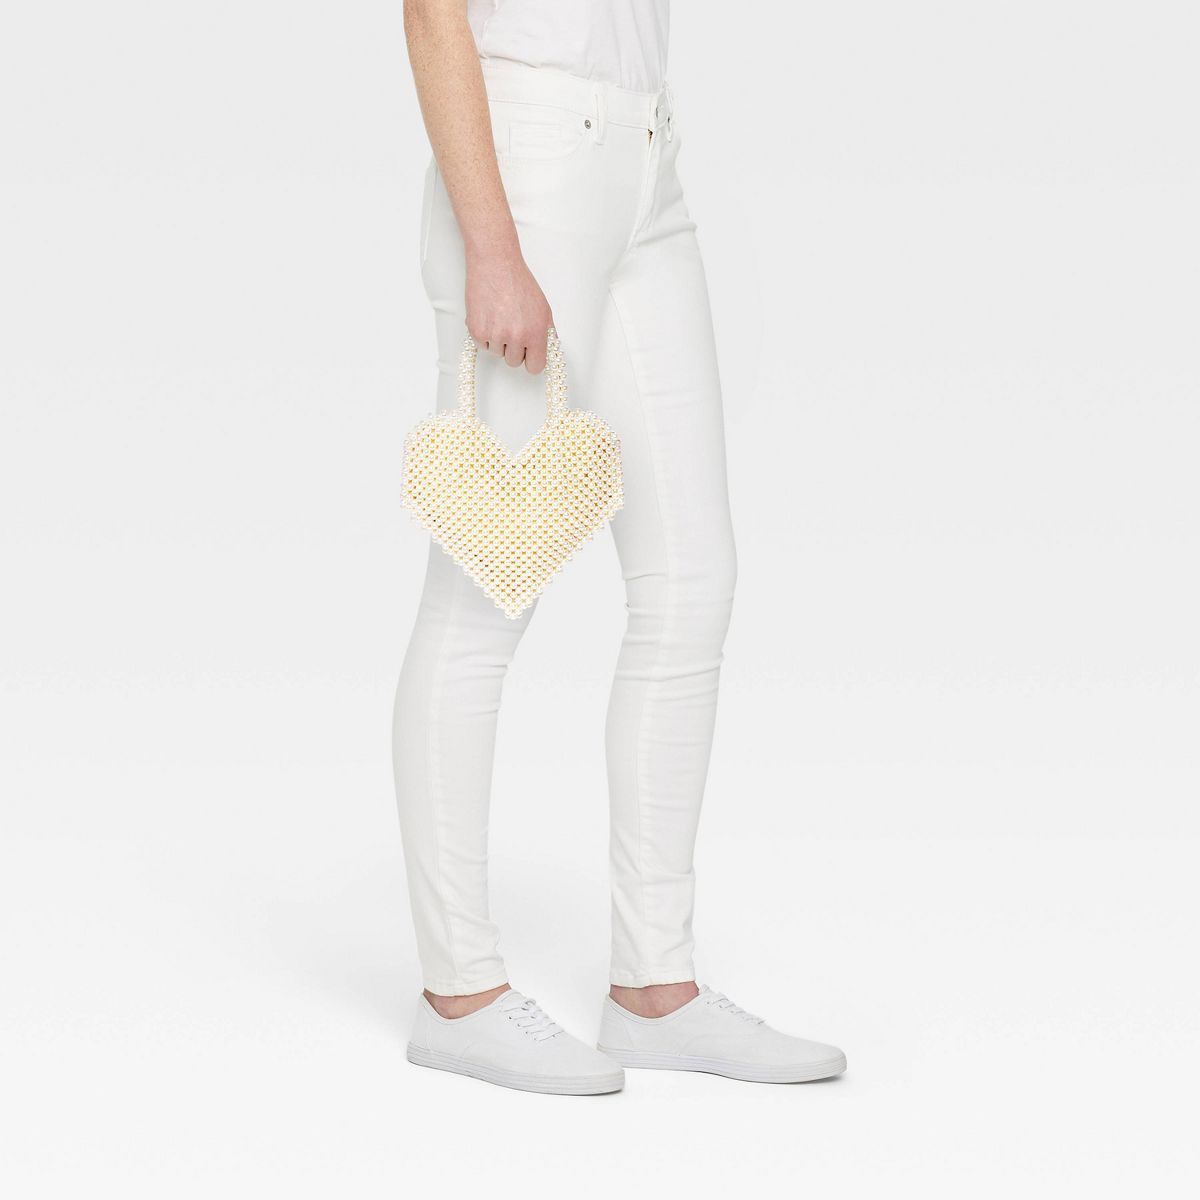 Beaded Pearl Heart Clutch - A New Day™ Off-White | Target